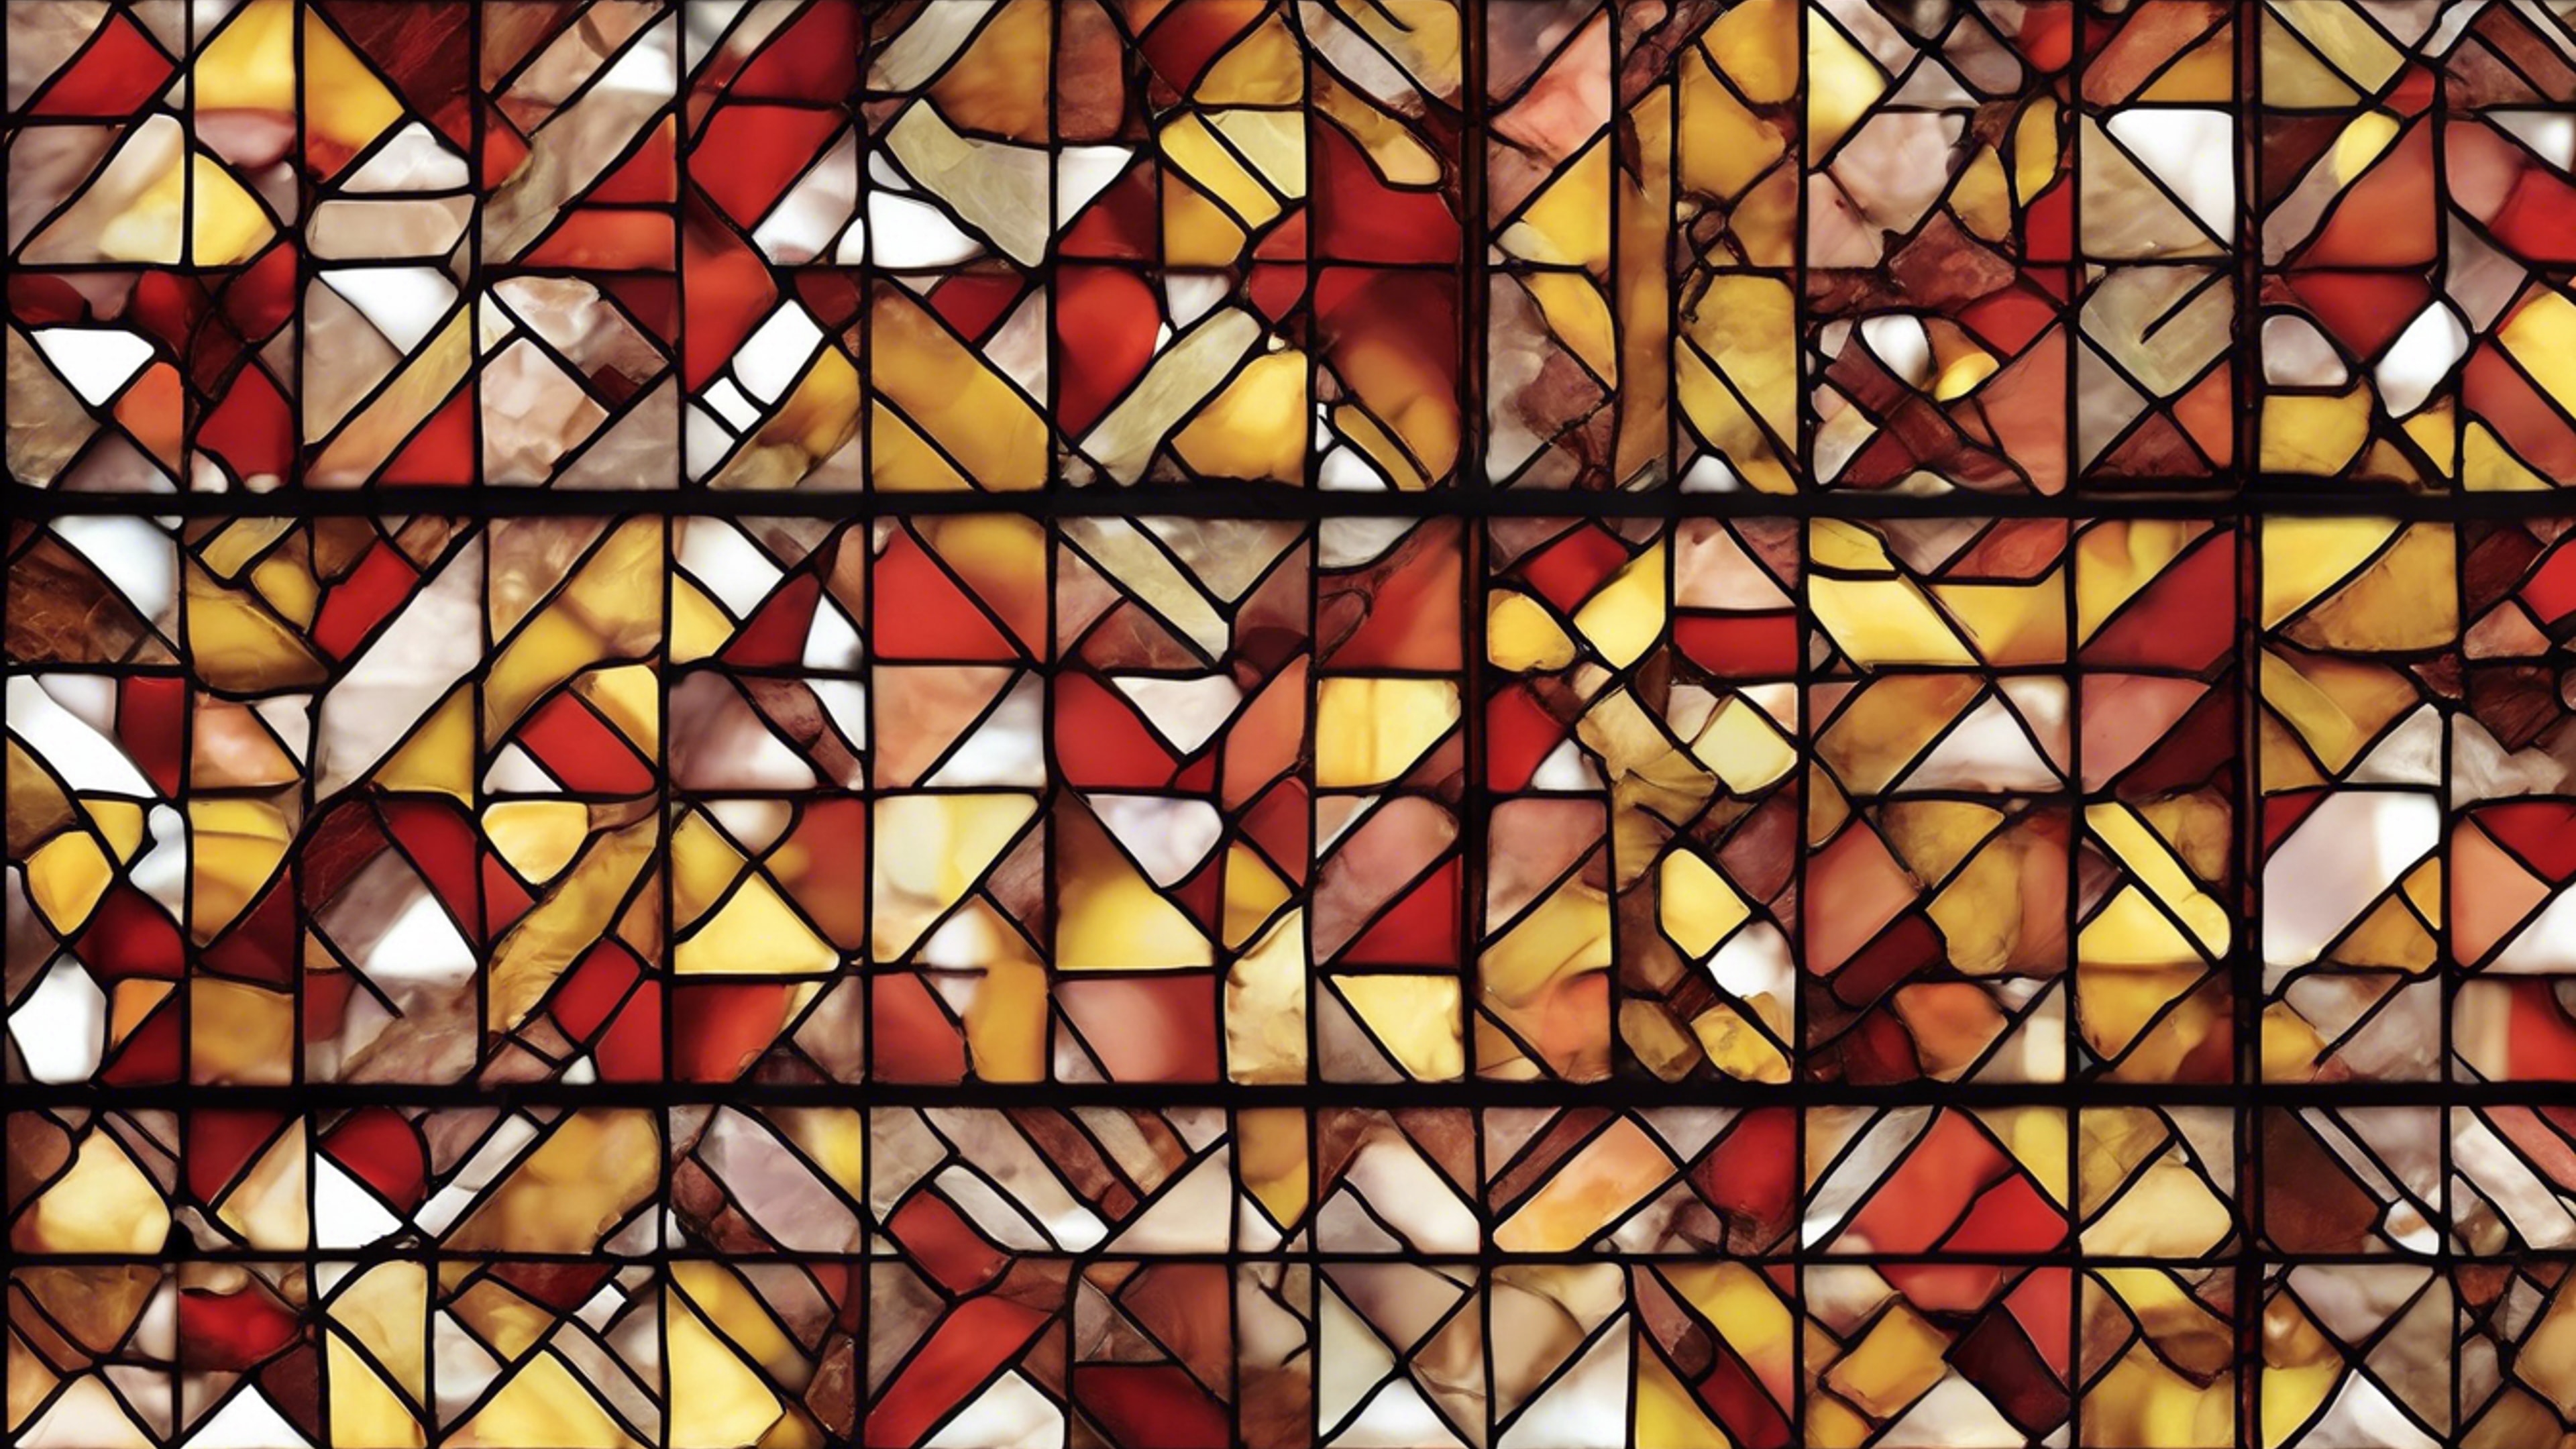 A stained glass design using a repeating motif of red and yellow bricks. Hintergrund[d98aa8b1ebac46789cc9]